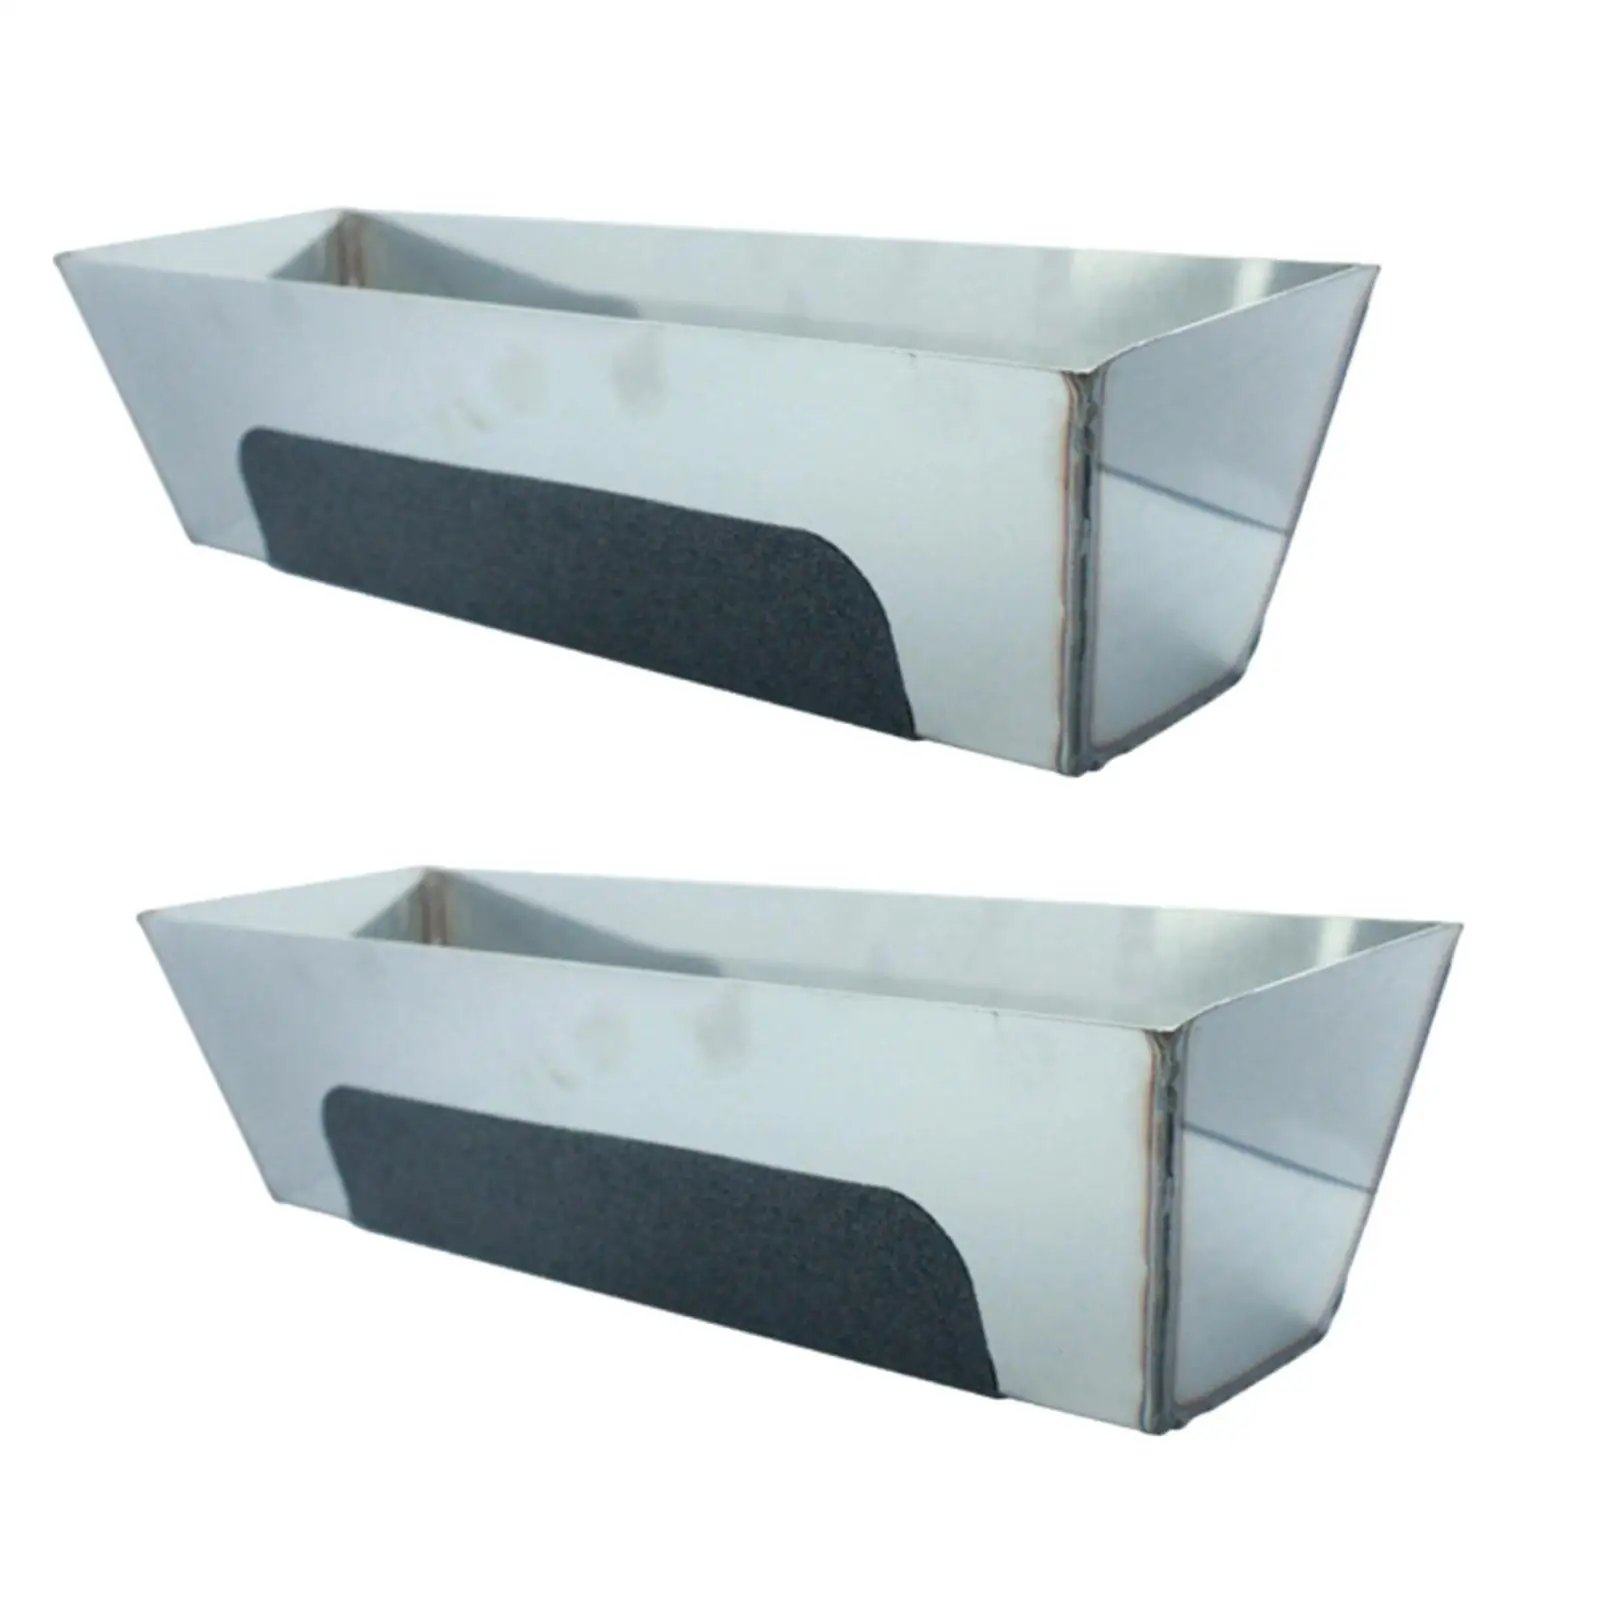 Stainless Steel Mud Pan Sturdy Bucket Metal Heavy Duty Tray Tool Anti Slip Drywall Sheared Edges Mud Pan for Easy Knife Cleaning